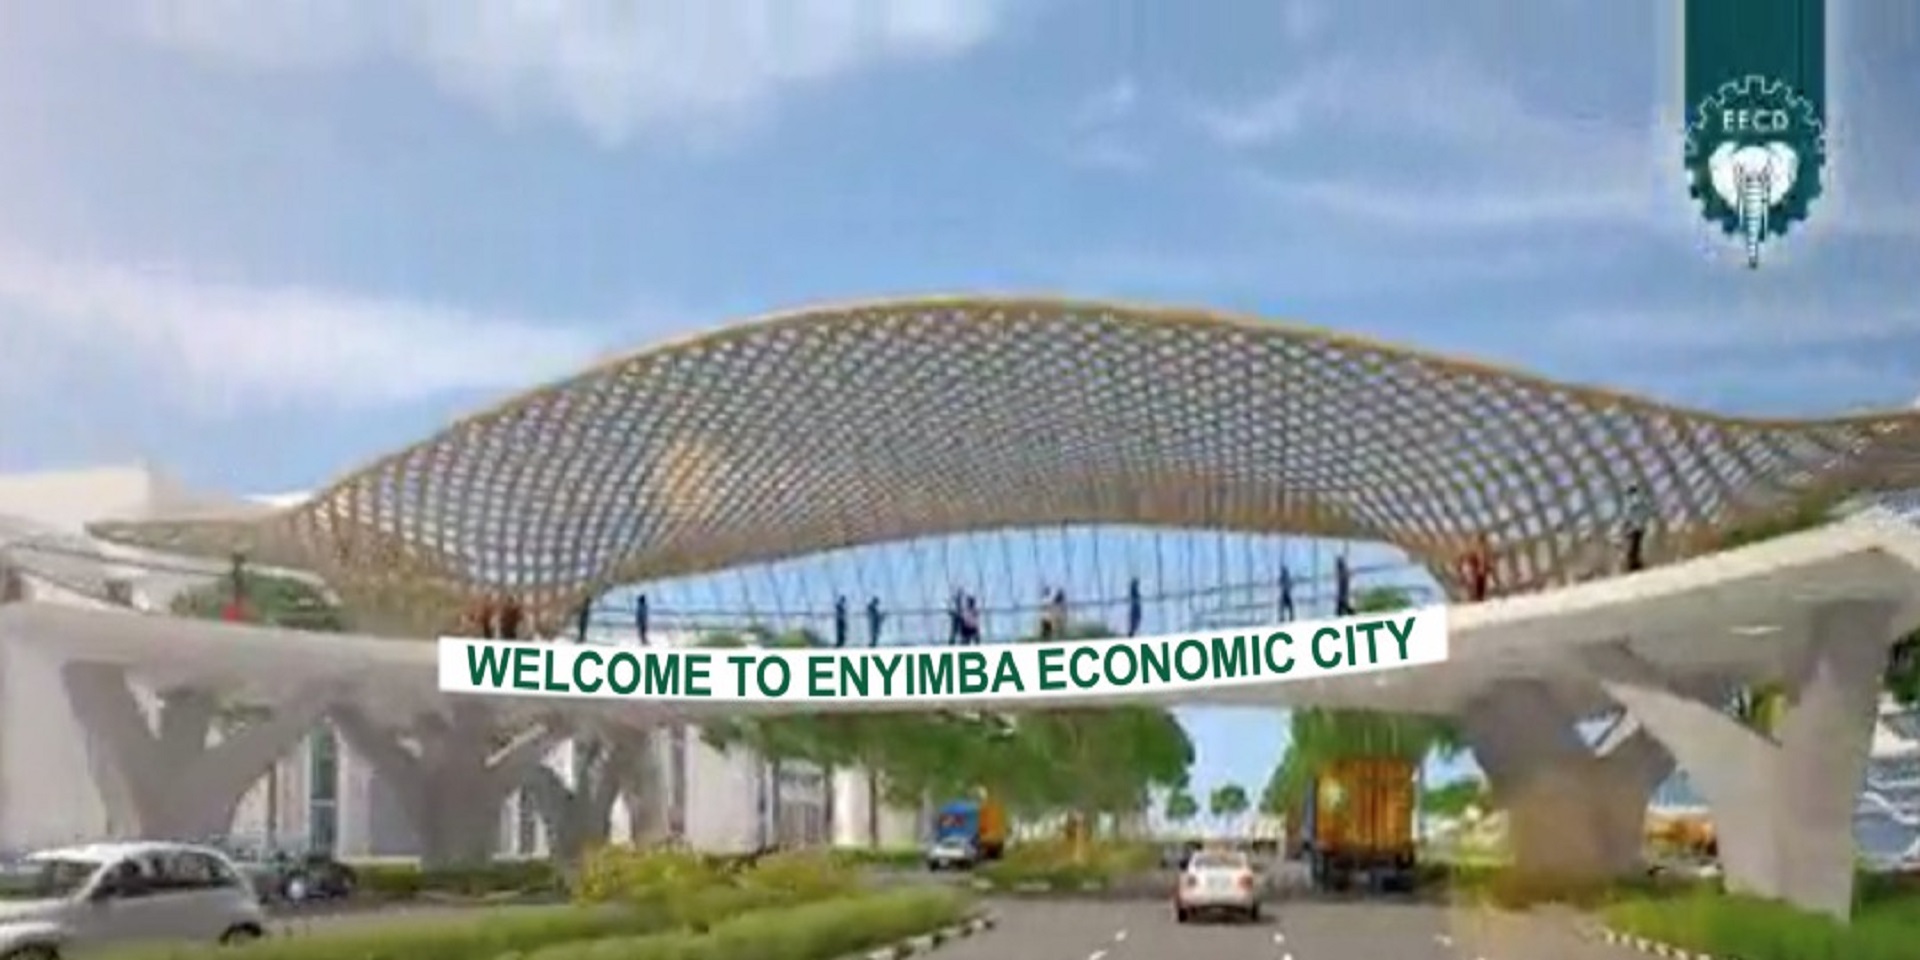 President Buhari And Governor Ikpeazu Signs Agreement To Establish Enyimba Economic City In Abia State 5